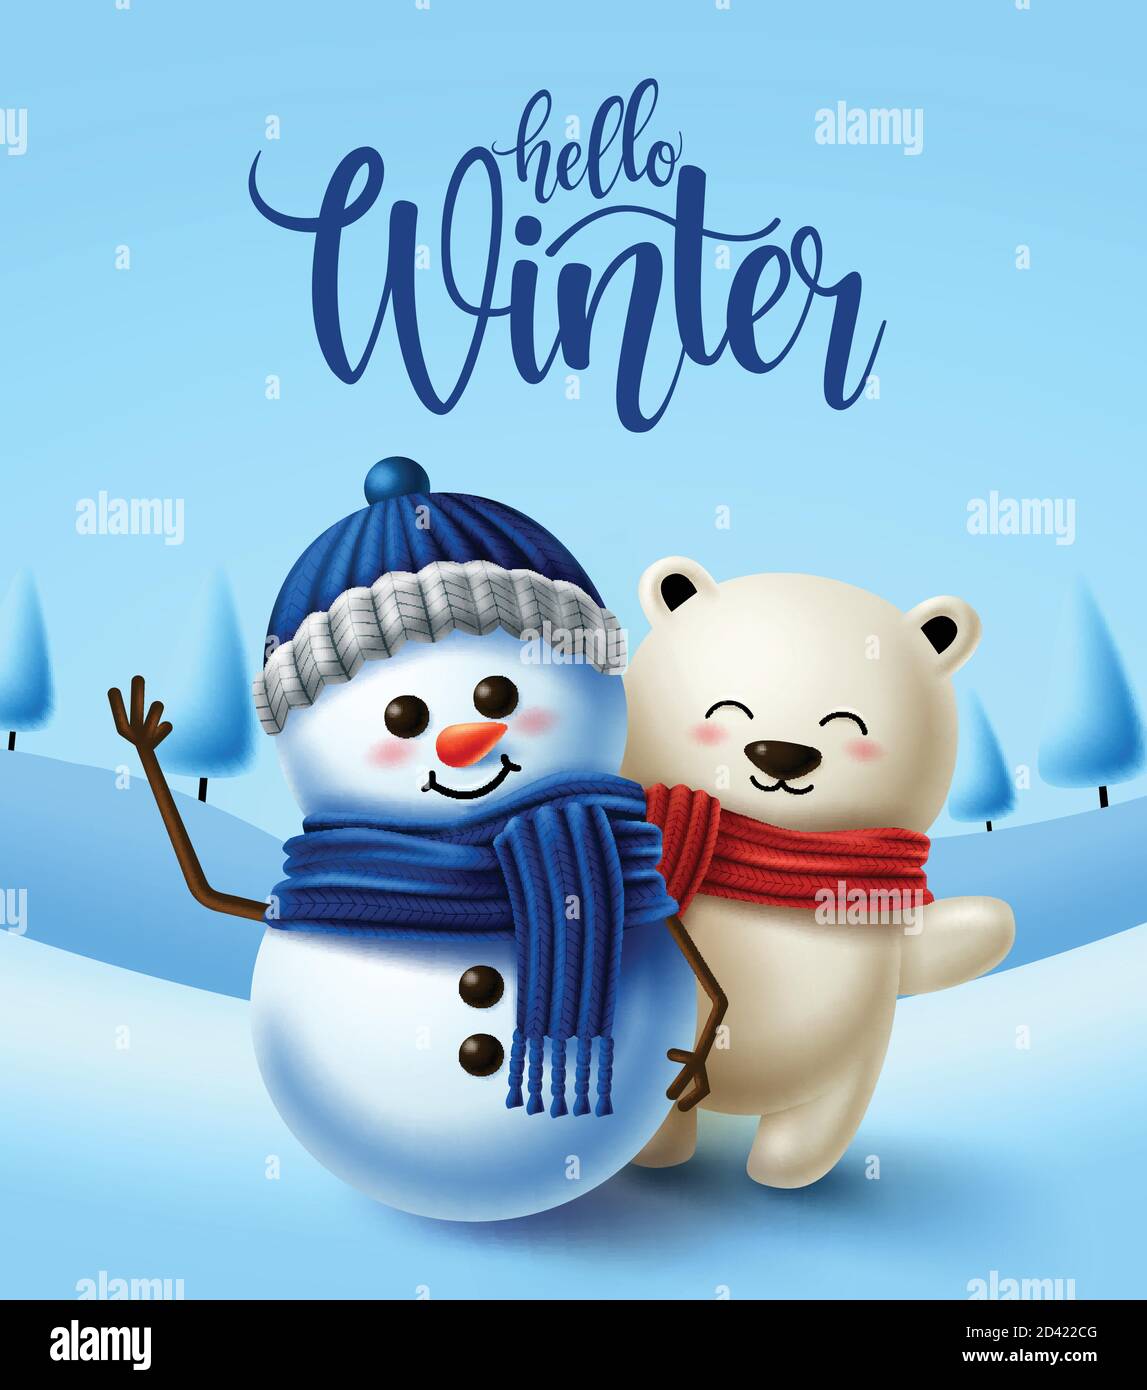 Winter character vector background design. Hello winter greeting text with 3d snowman and polar bear characters in cold snowy background. Vector Stock Vector